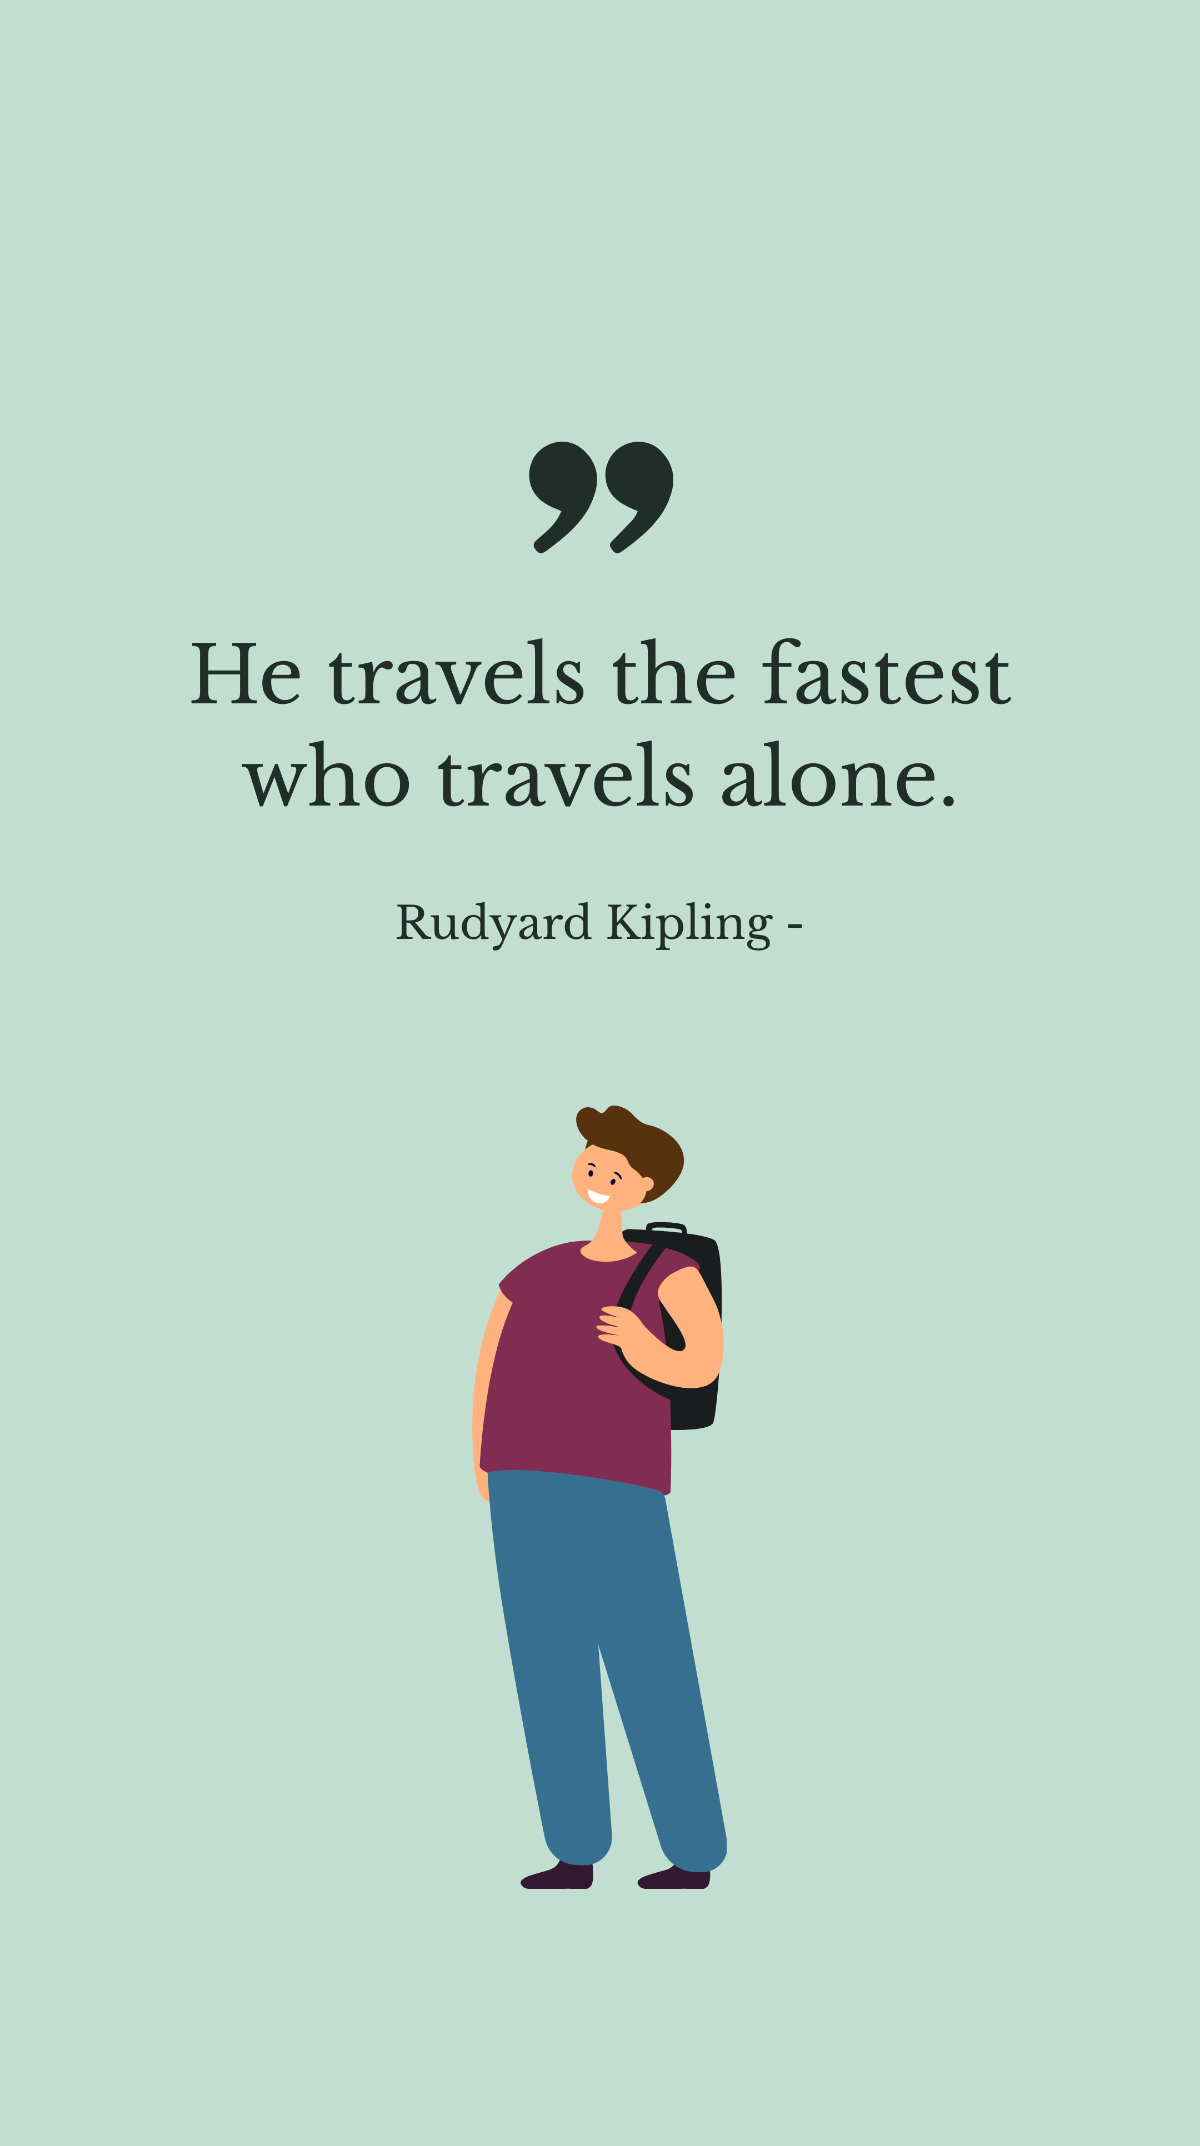 Free Rudyard Kipling - He travels the fastest who travels alone. Template